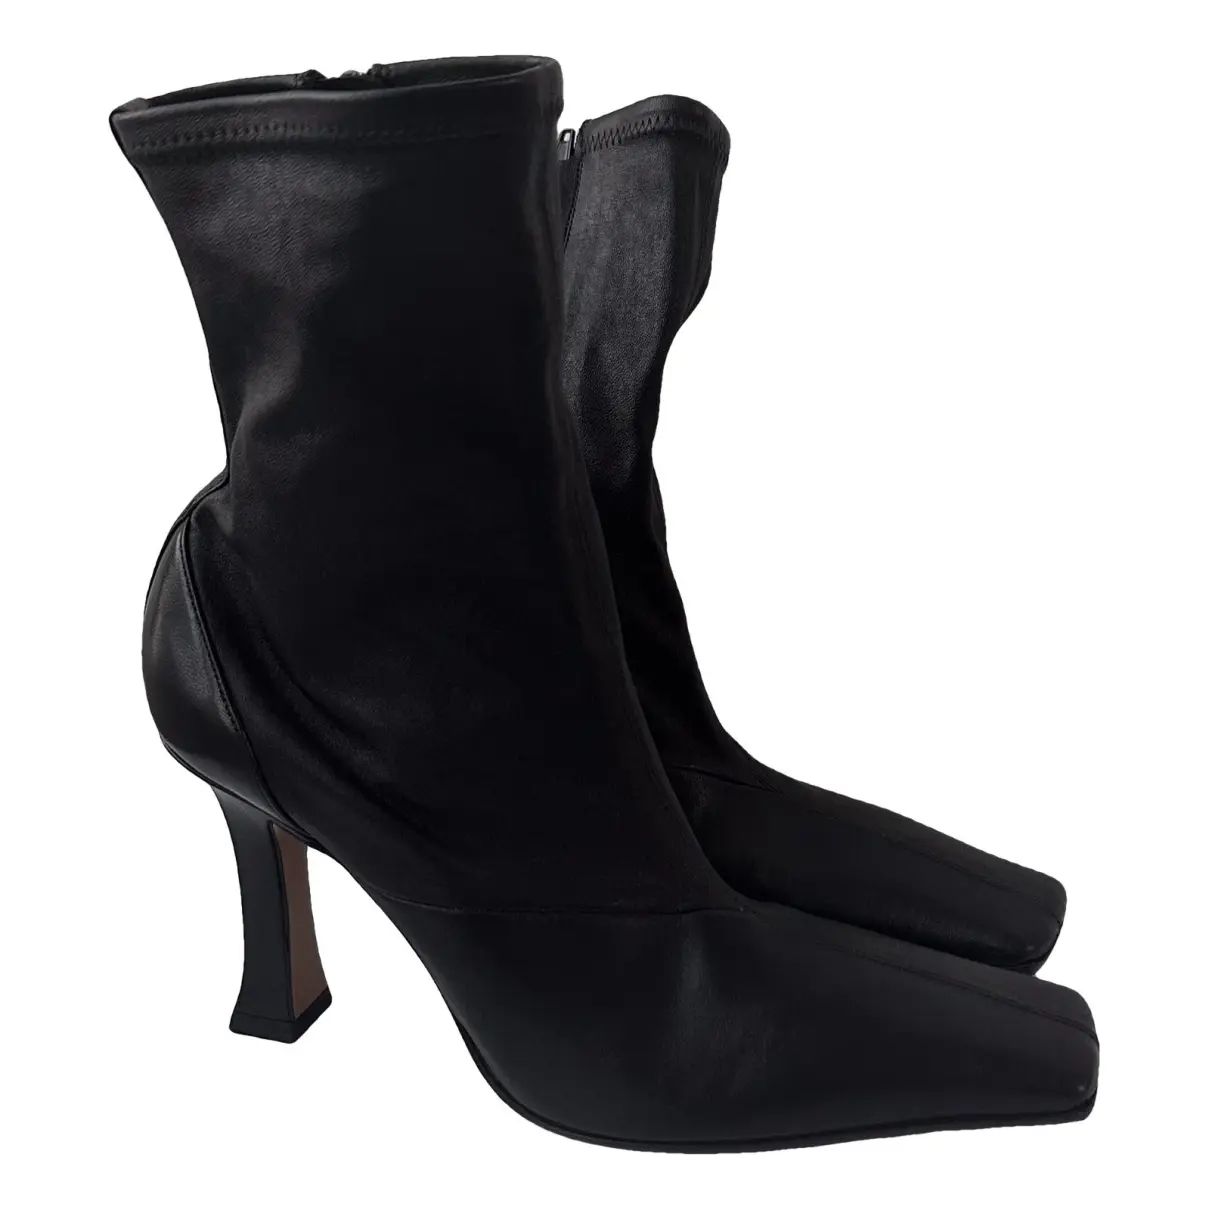 Madame leather mocassin boots | Vestiaire Collective (Global)